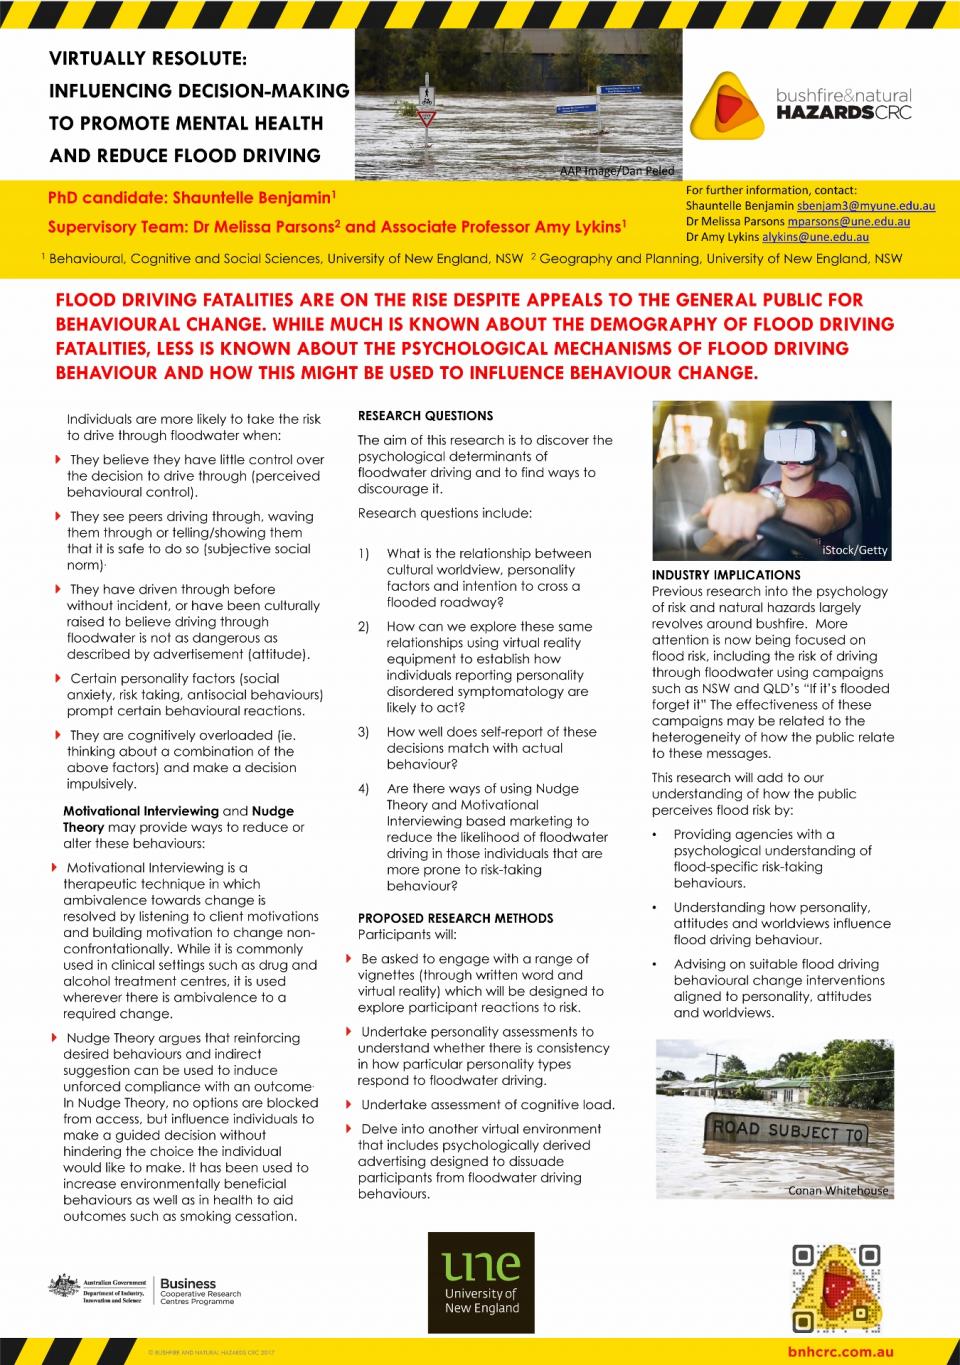 Virtually resolute: influencing decision-making to promote mental health and reduce flood driving